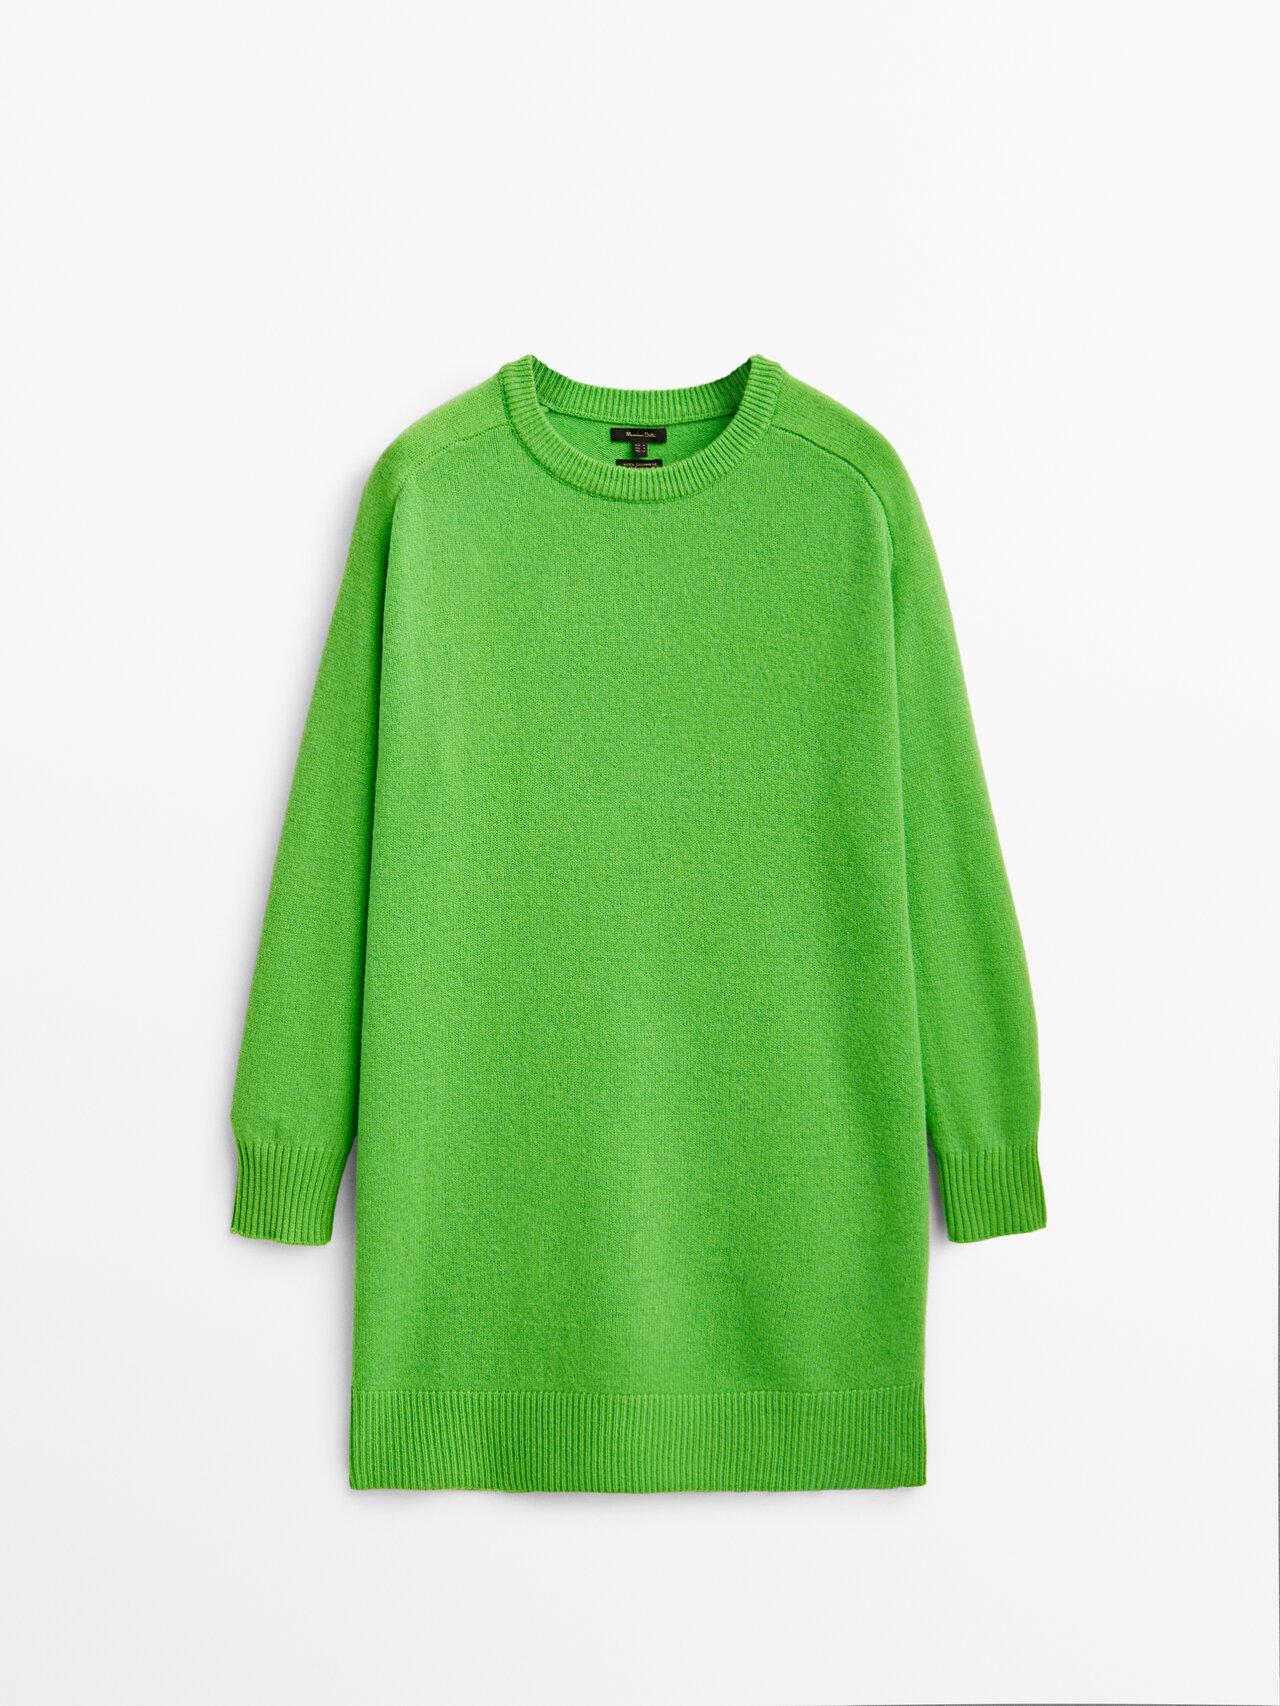 MASSIMO DUTTI Short Knit Wool And Cashmere Dress in Green | Lyst